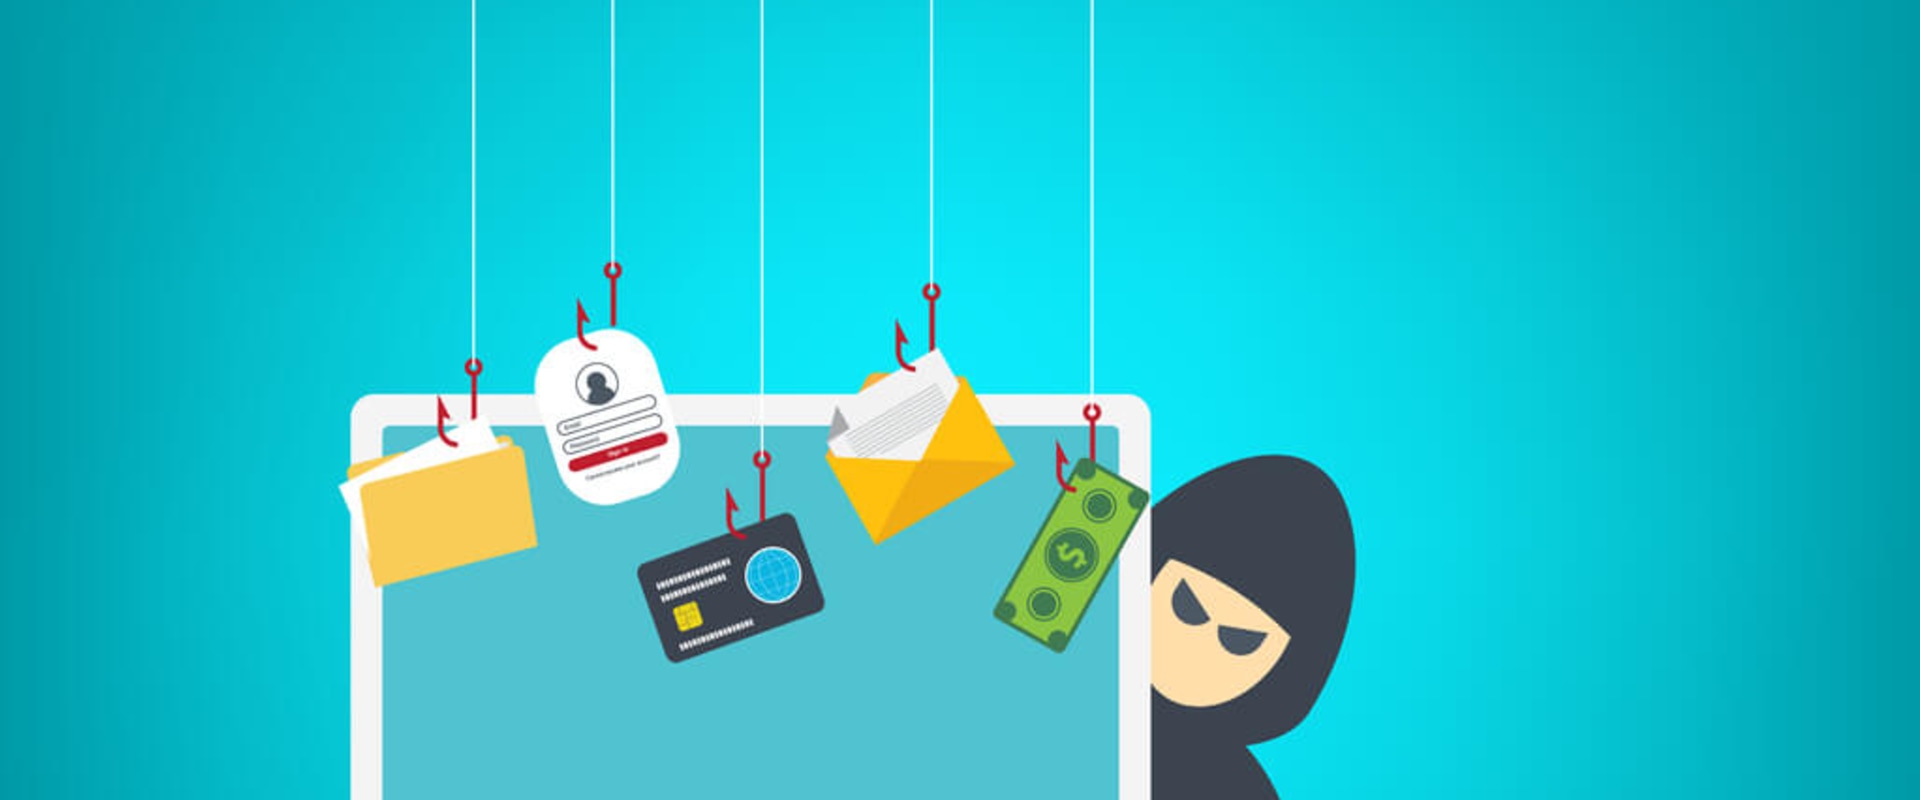 5 Fraud Prevention Strategies Every Business Owner Should Know